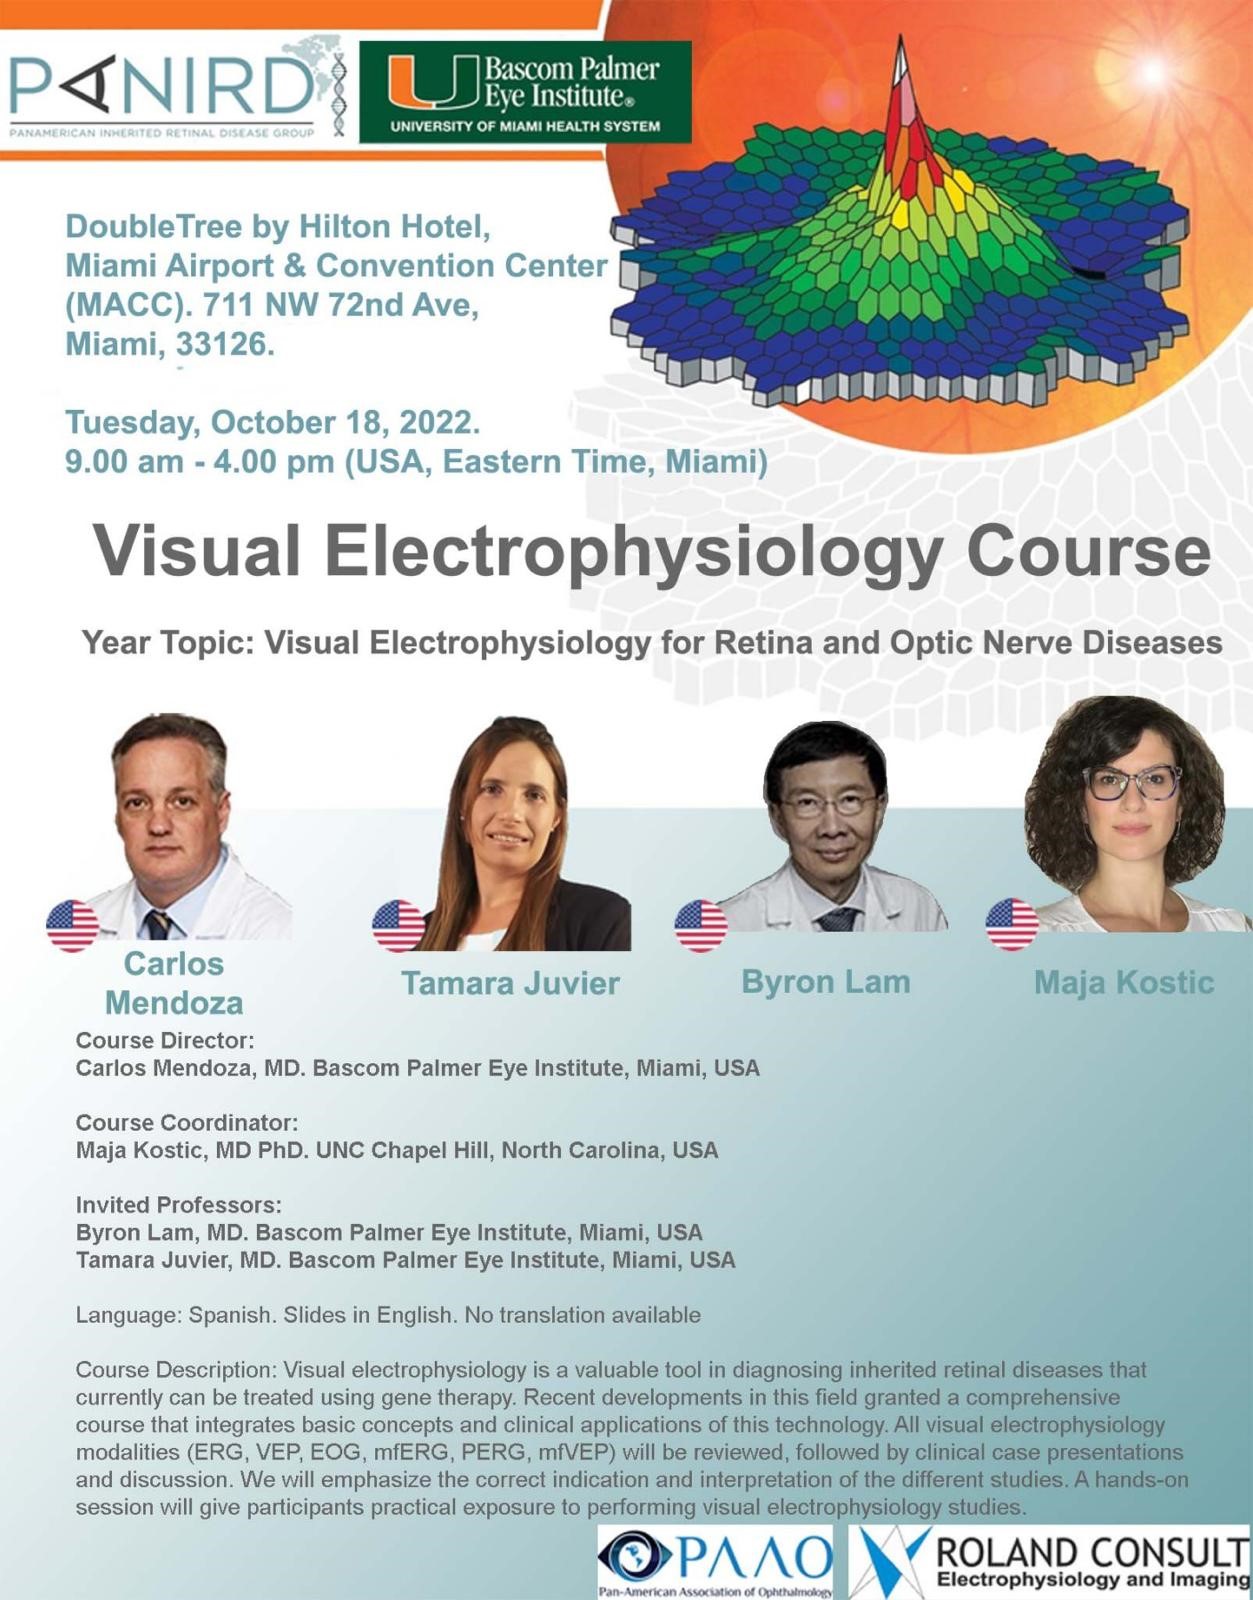 Flyer to the Visual Electrophysiology Course on Oct. 18. 2022 in Miami Airport & Convention Center, Miami USA